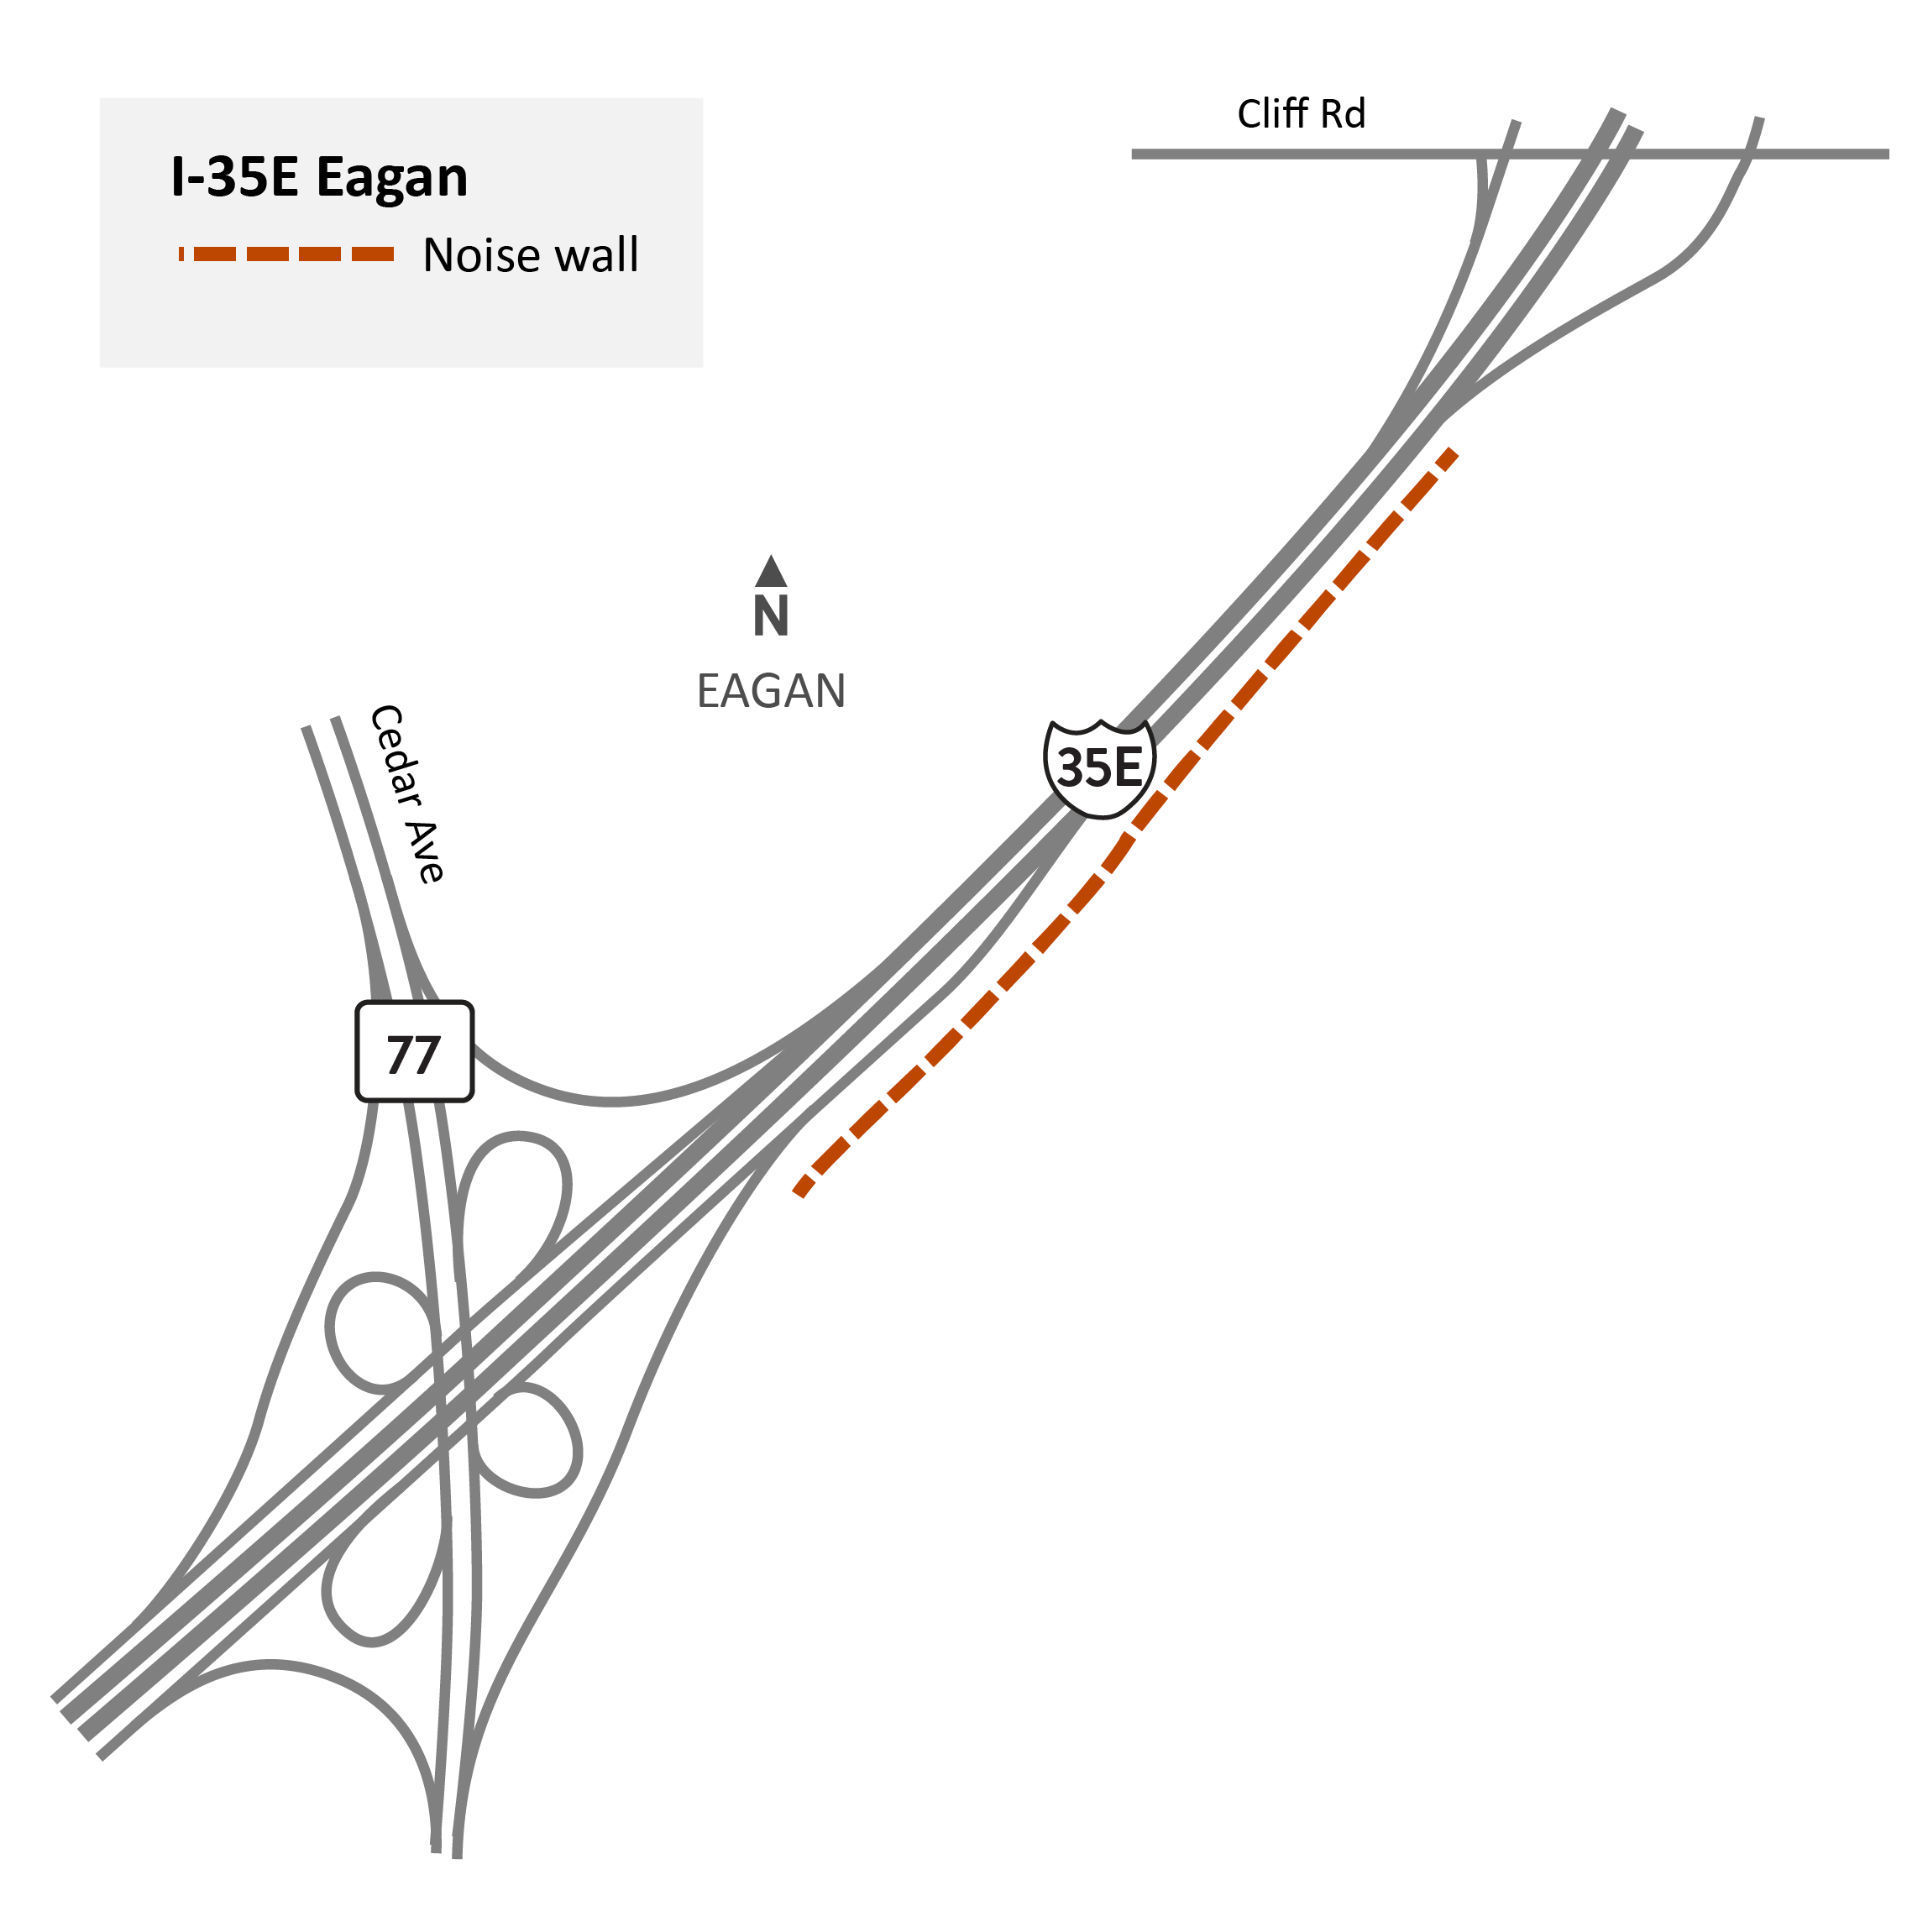 I-35E standalone noise wall in Eagan project area map